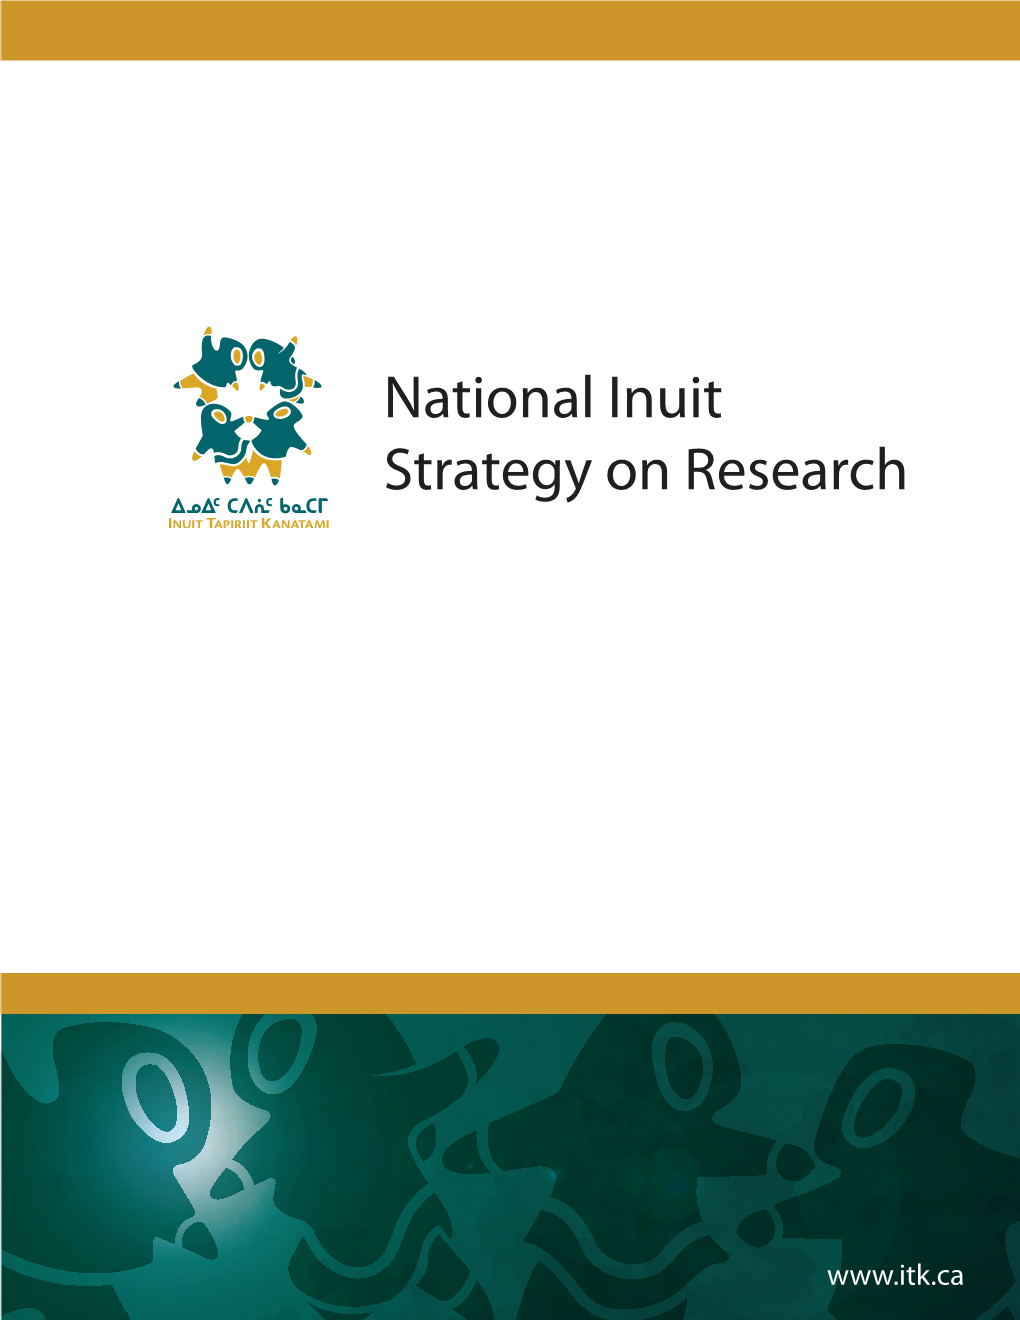 Read the National Inuit Strategy on Research